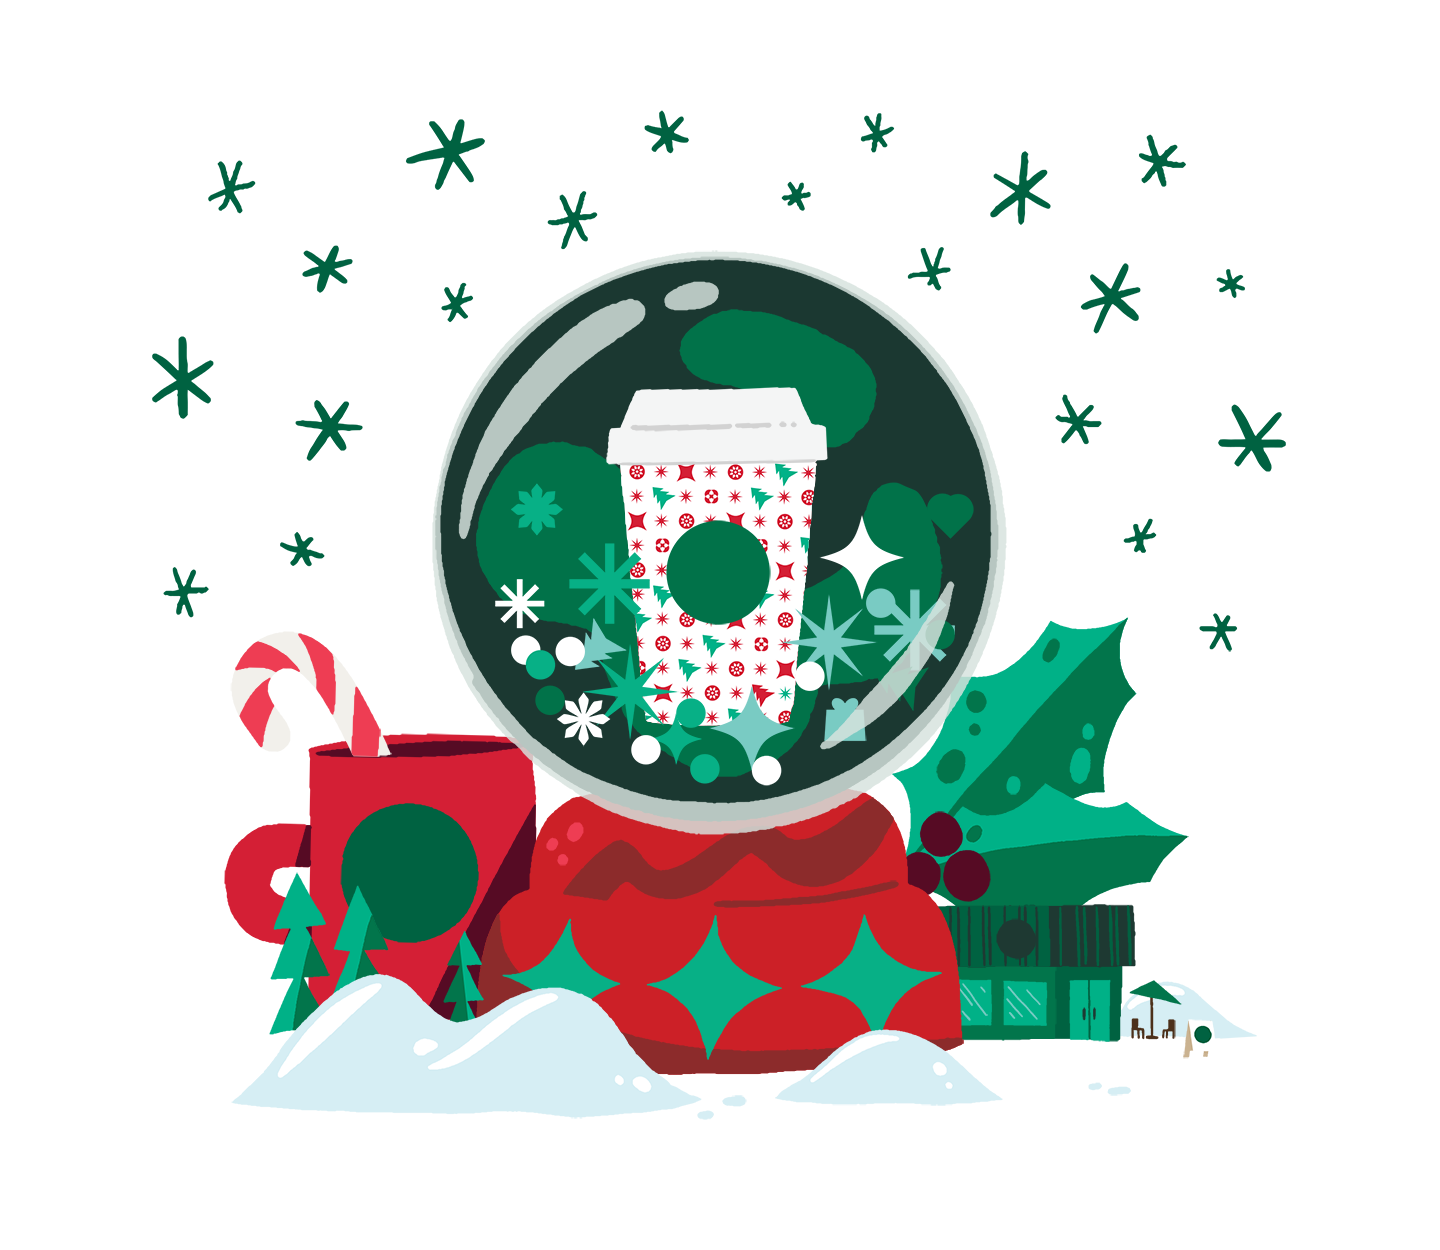 A snow globe with a Starbucks cup in the center of it, surrounded by a coffee mug with a candy cane in it, holly leaves, and snow.